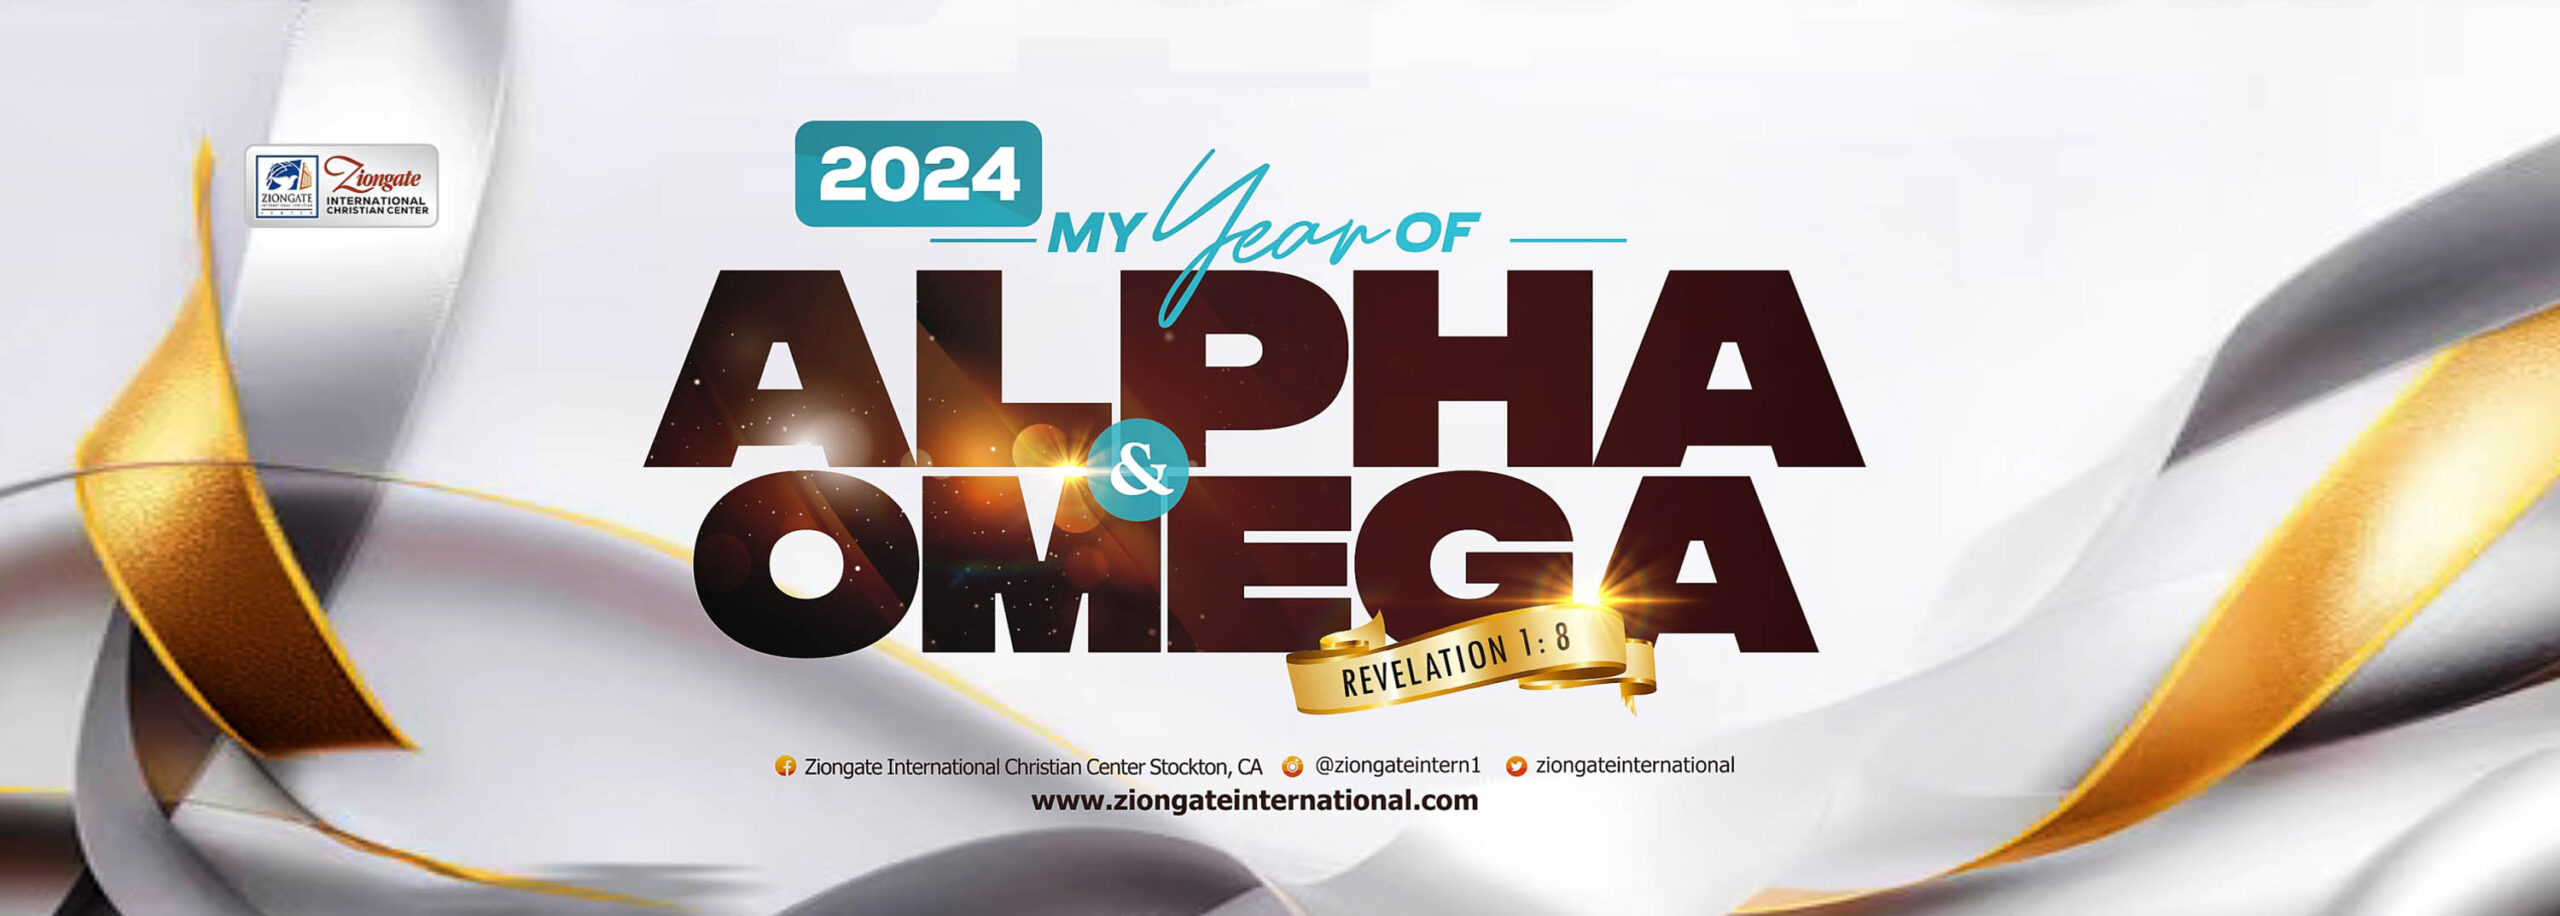 2024 - Our Year of Alpha and Omega - ZICC Ziongate